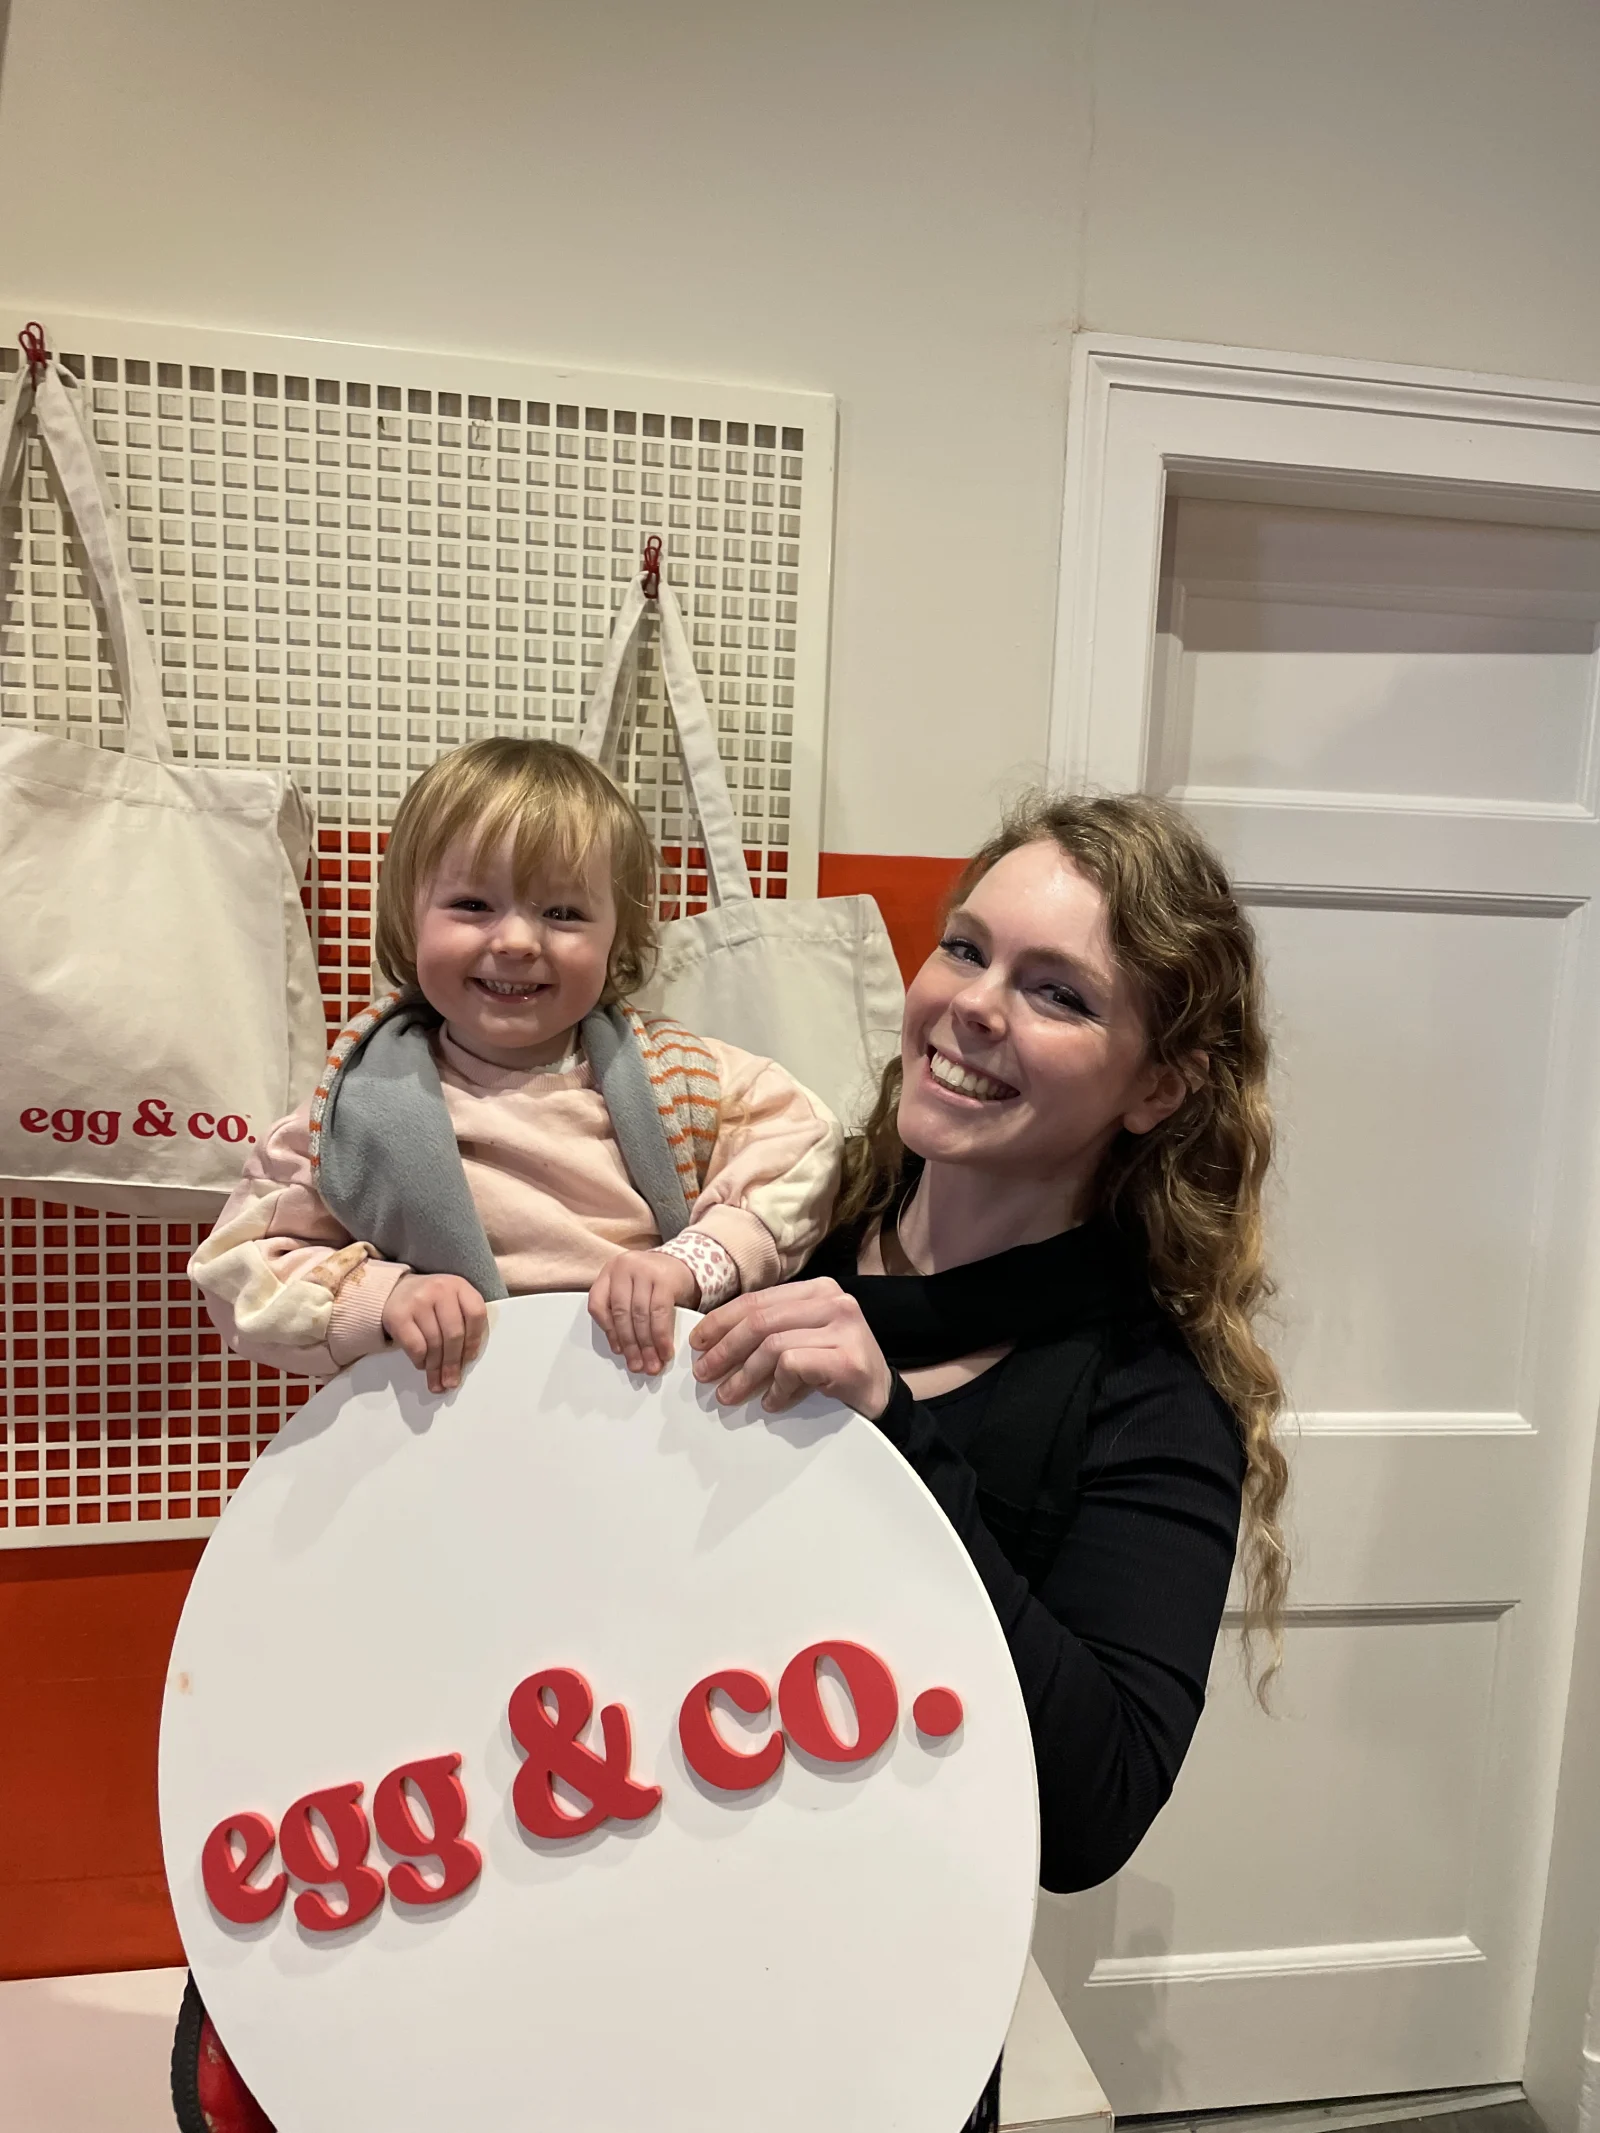 egg & co-working Day with CHILDCARE!